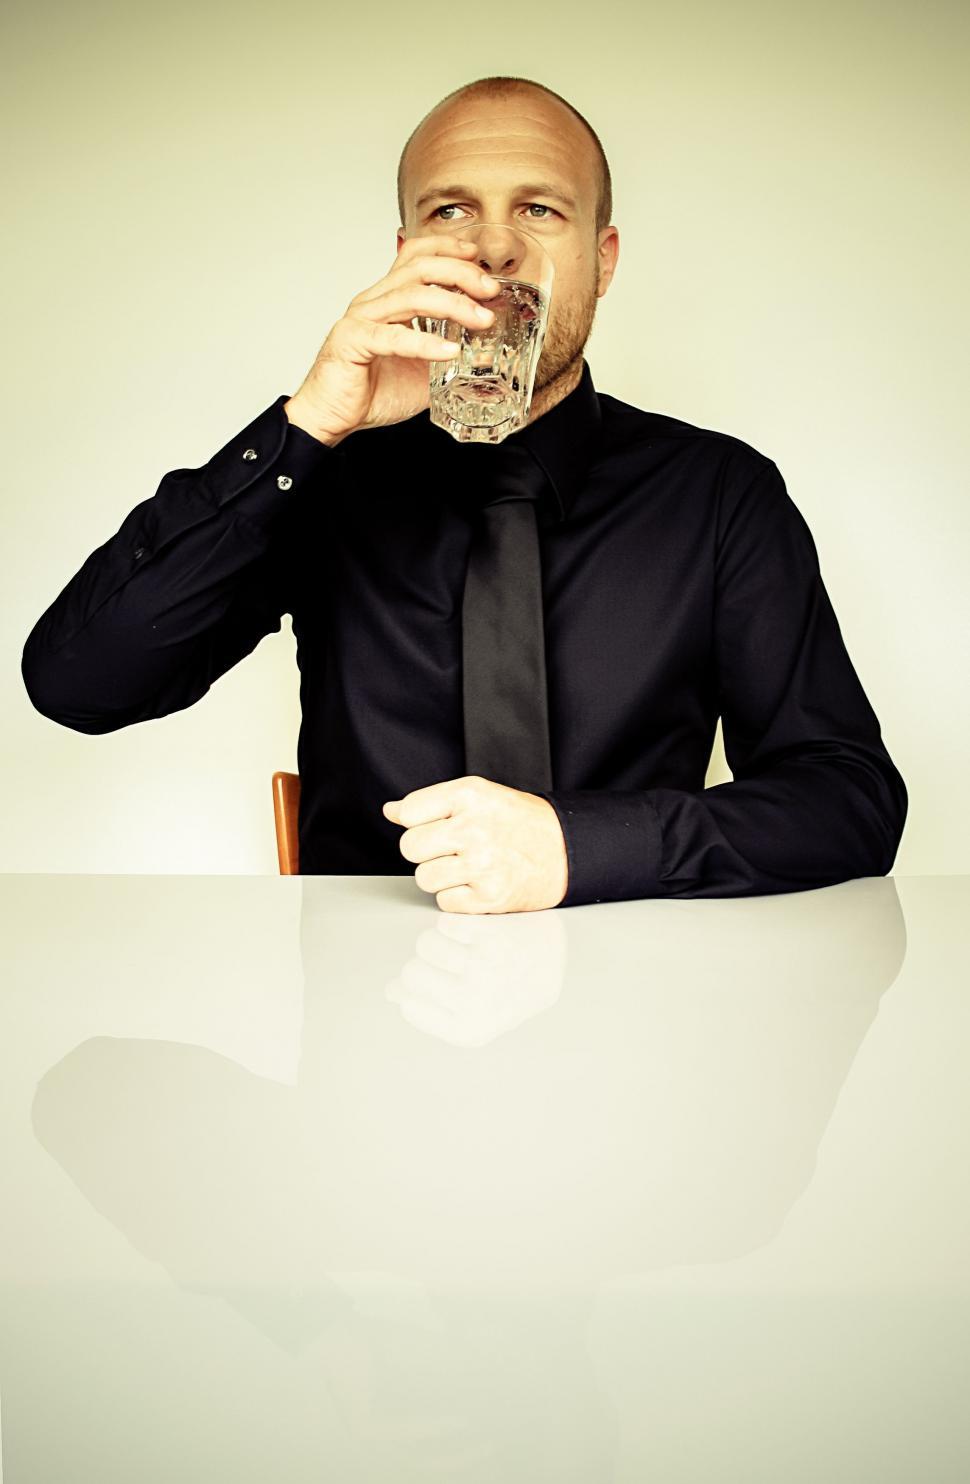 Free Image of Businessman Drinking Water  